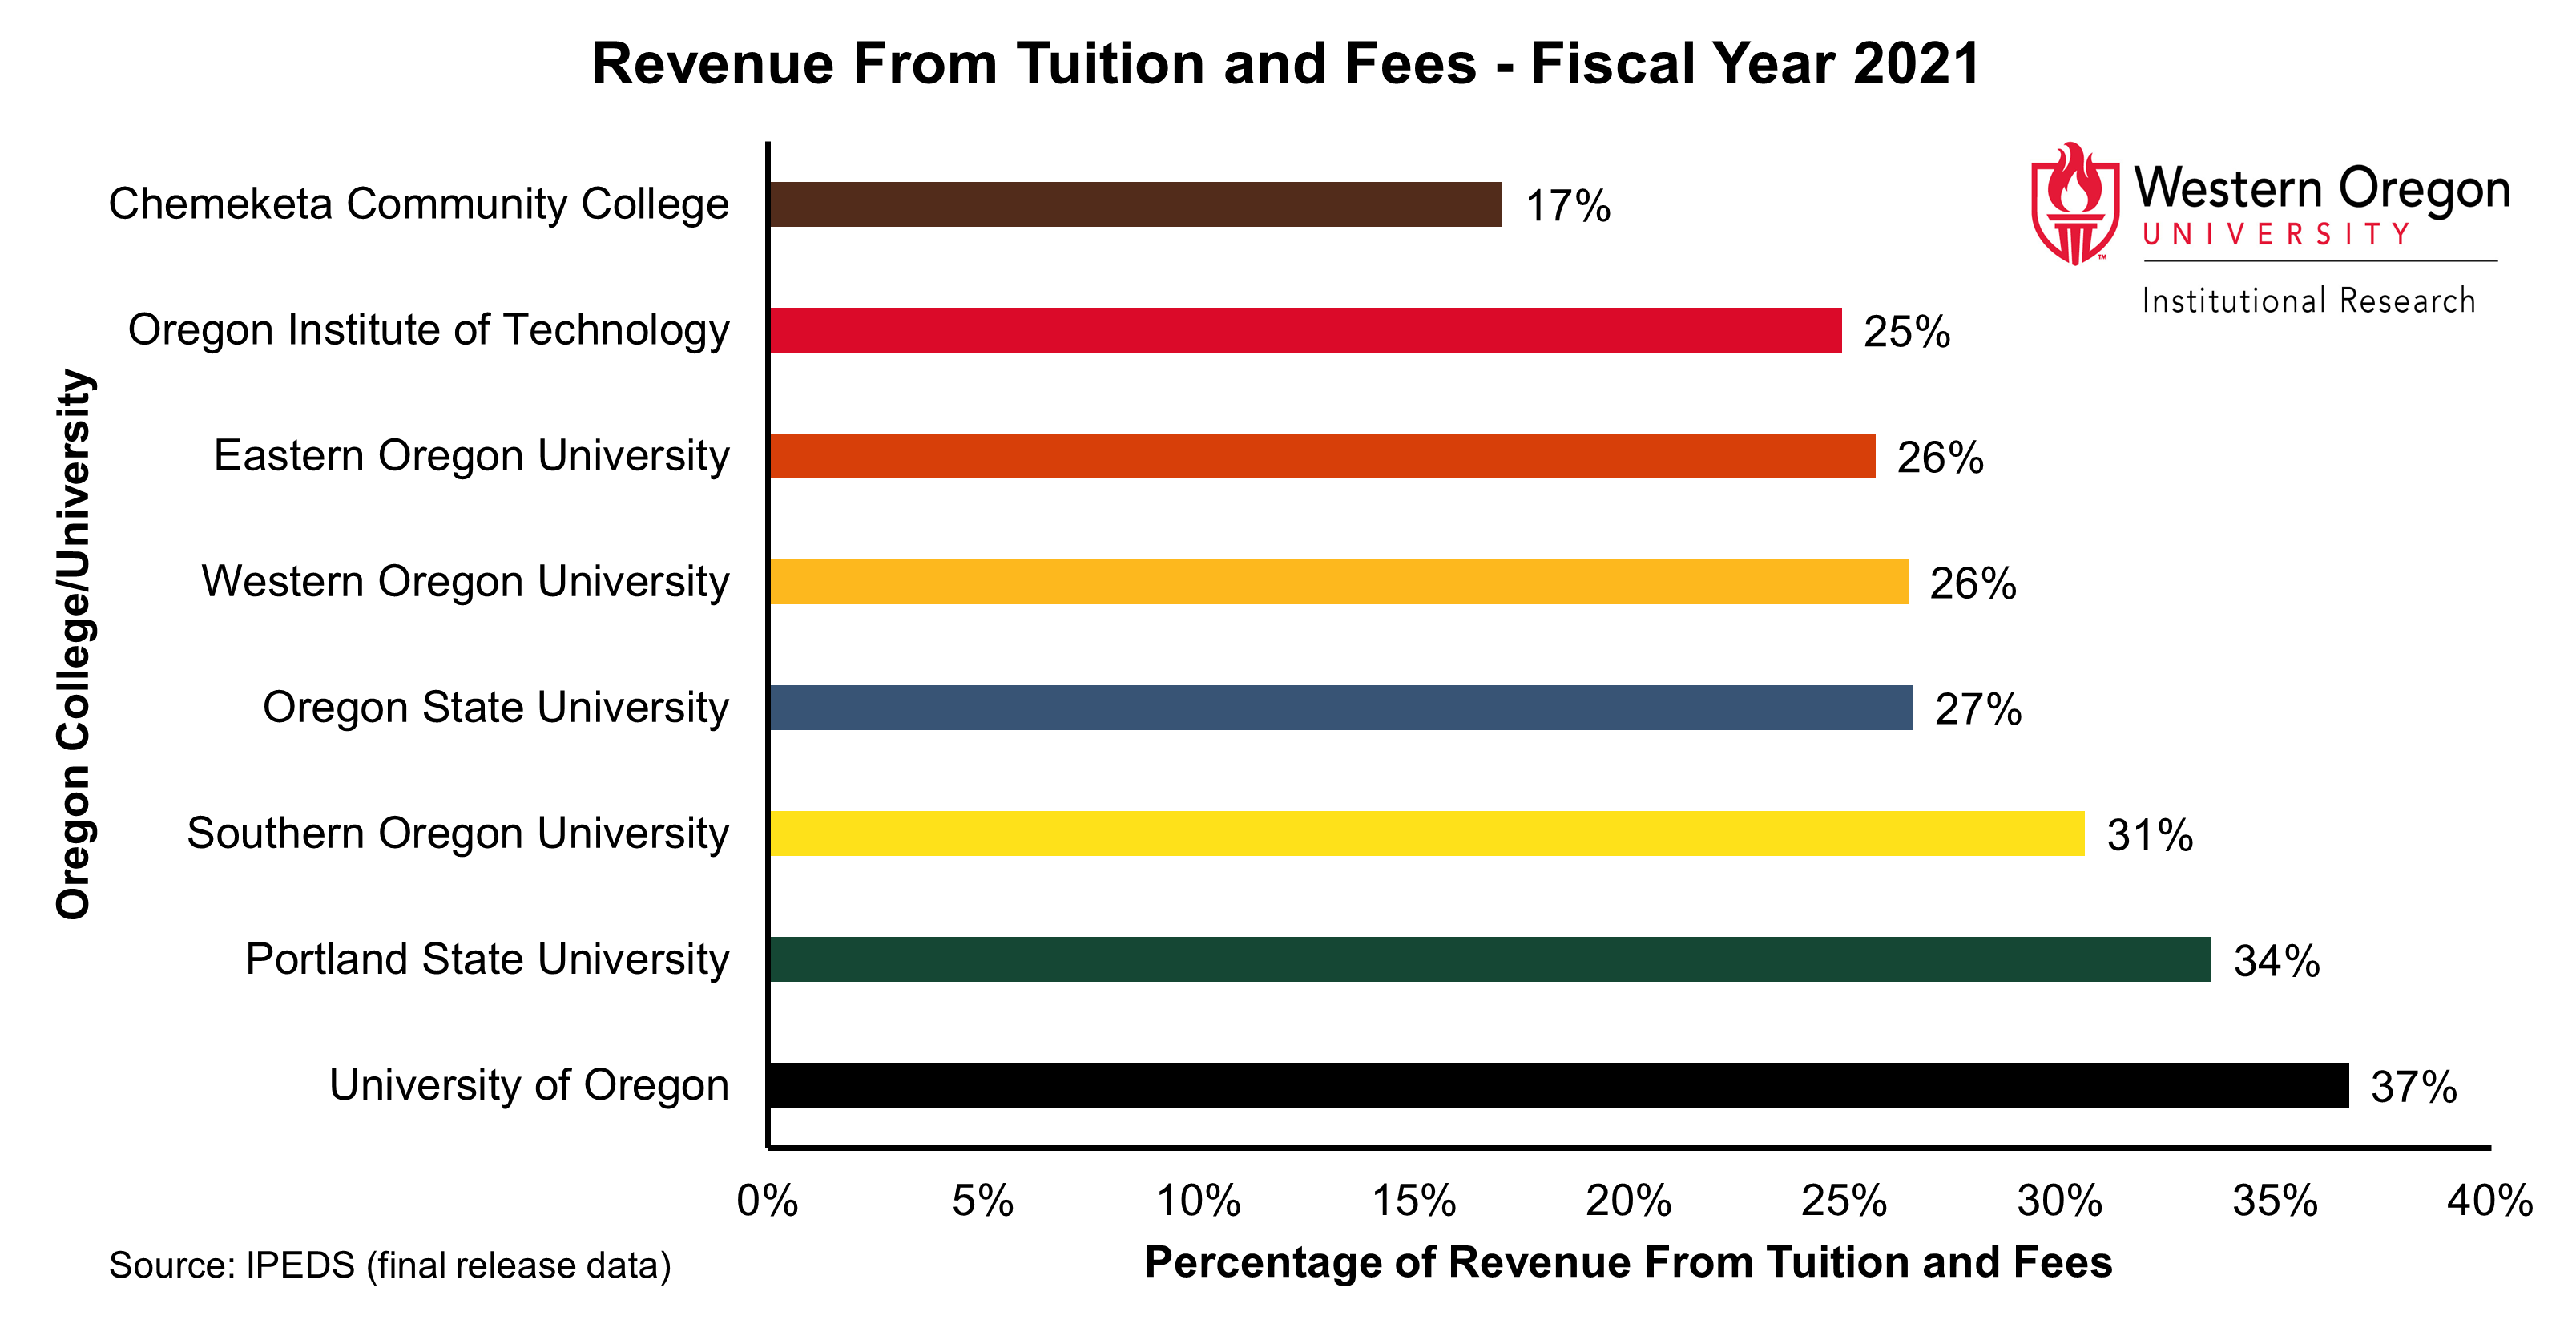 Bar graph of the percentage of revenue from tuition and fees for WOU and other Oregon Public Universities in 2021, showing percentages that range from 17% to 37% with WOU's percentage falling near the median